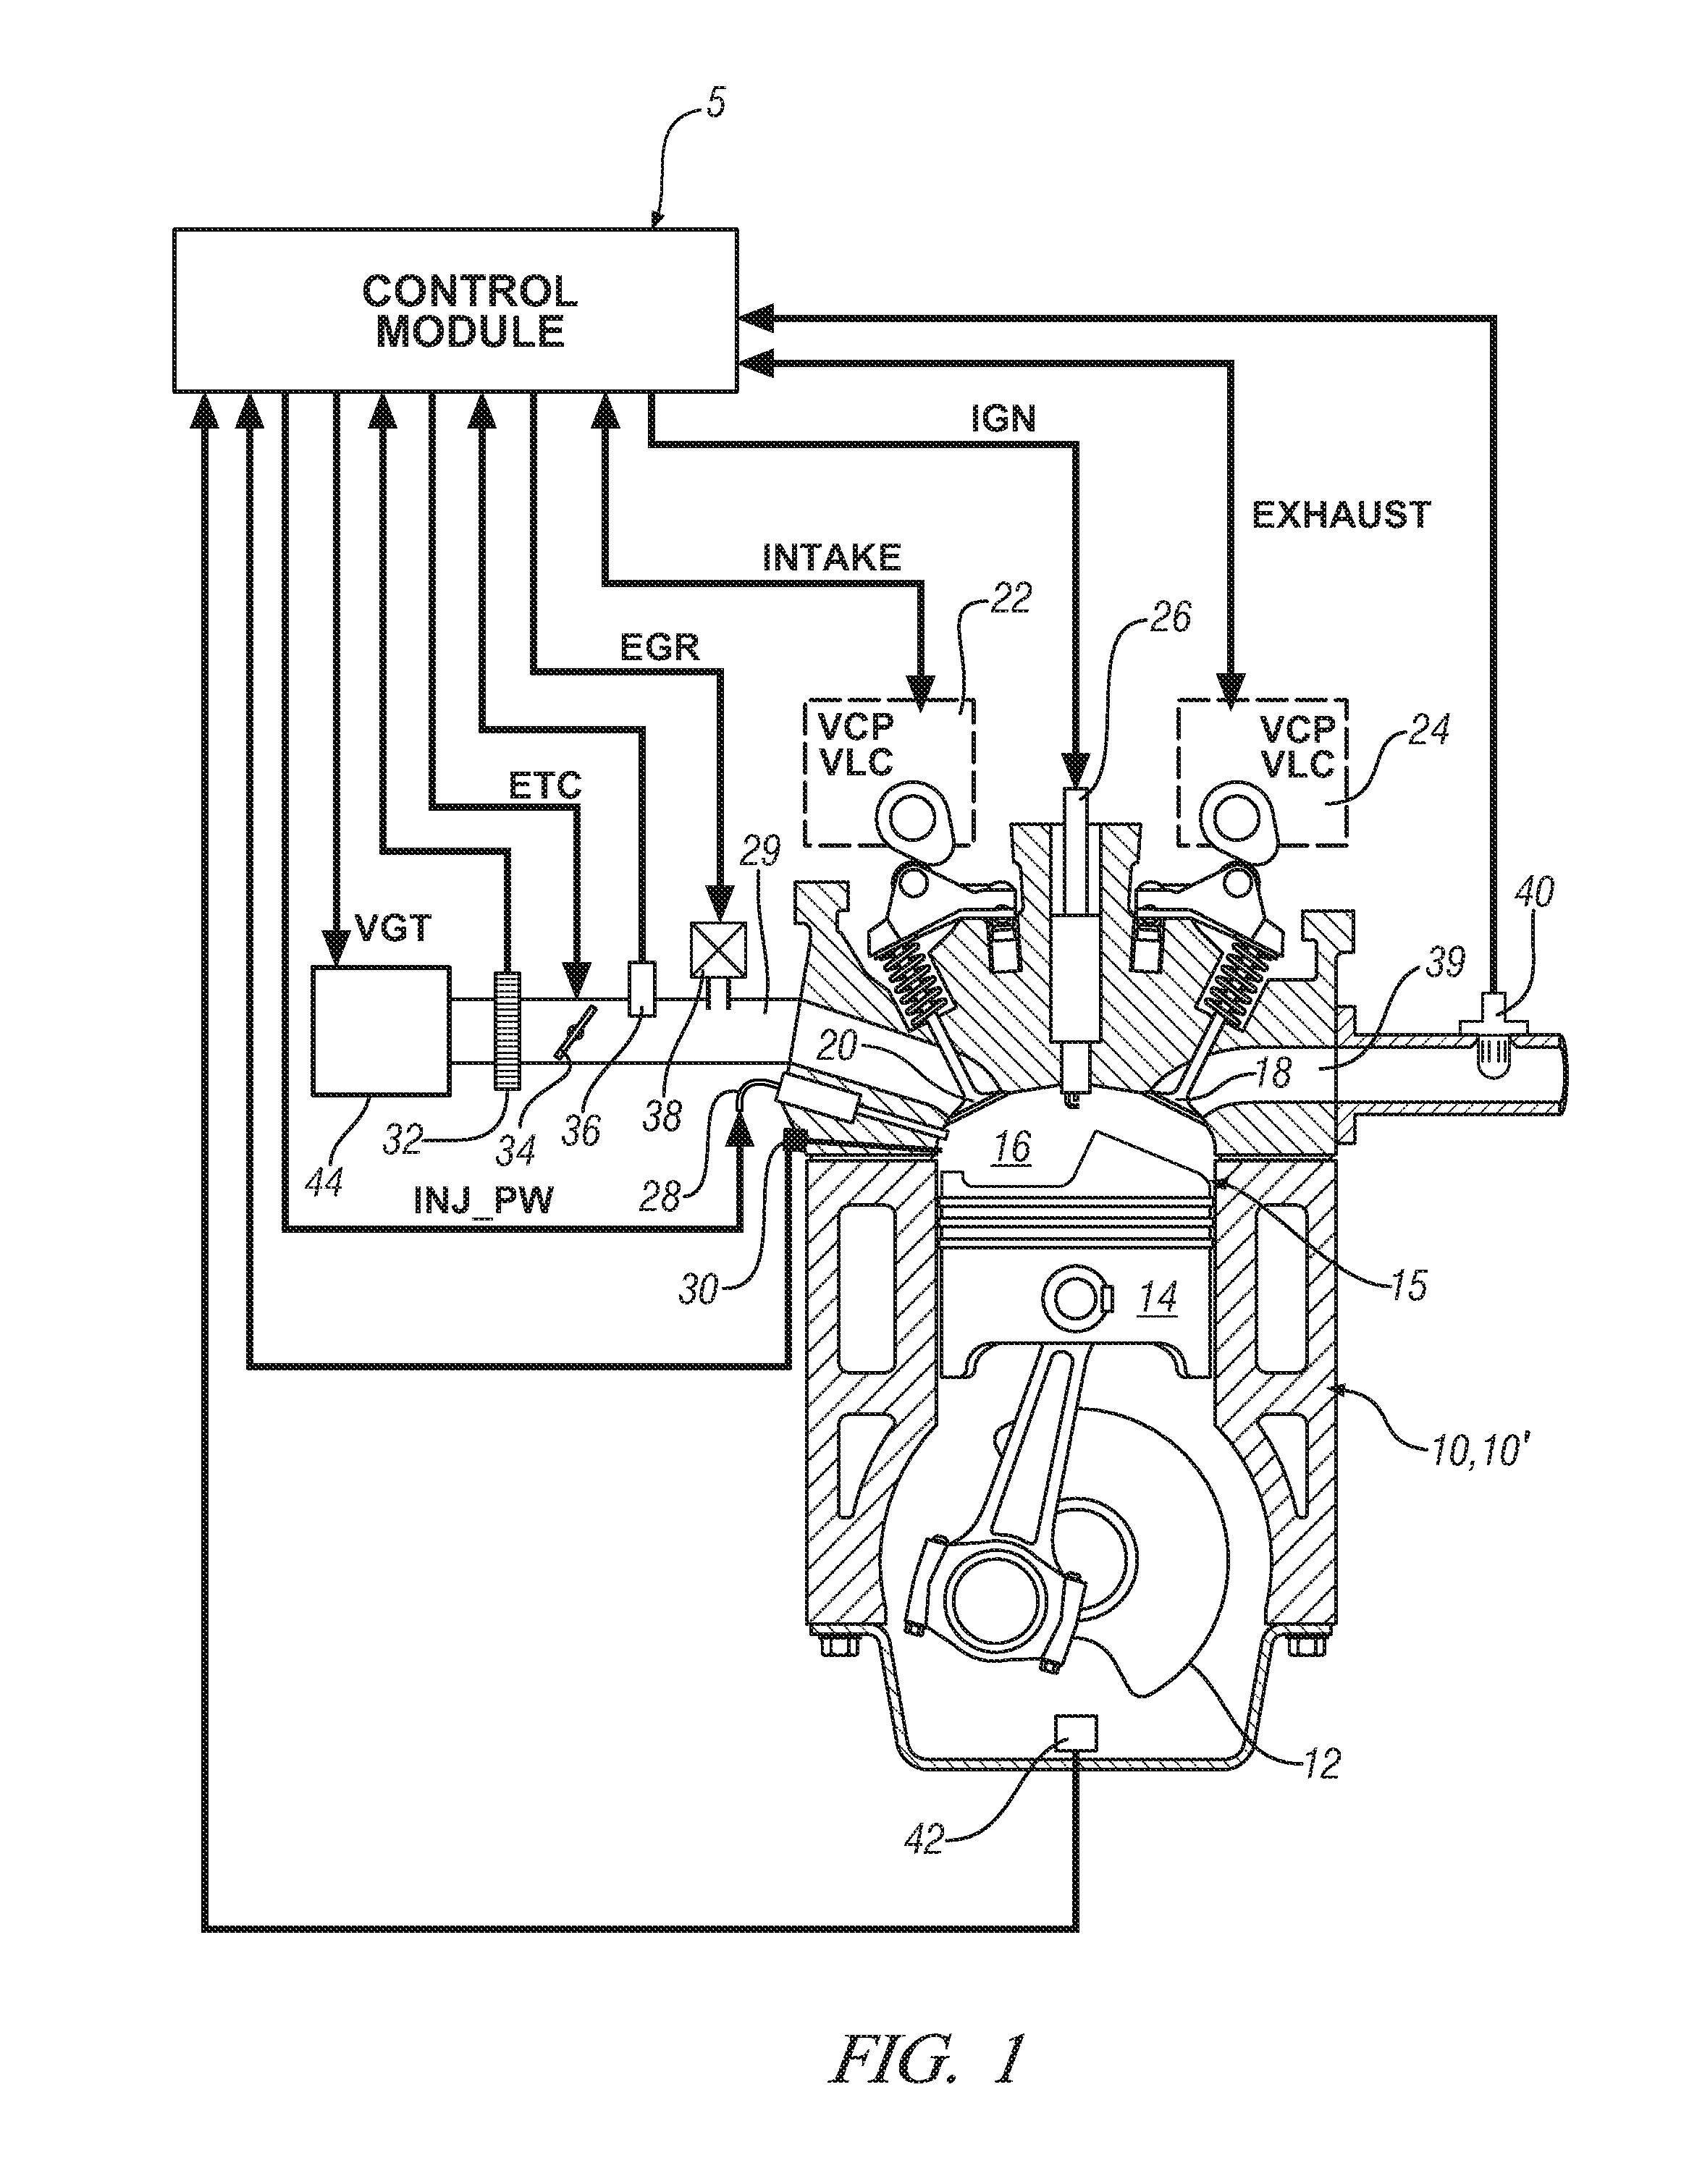 Transient combustion noise control in a hybrid powertrain including an hcci engine